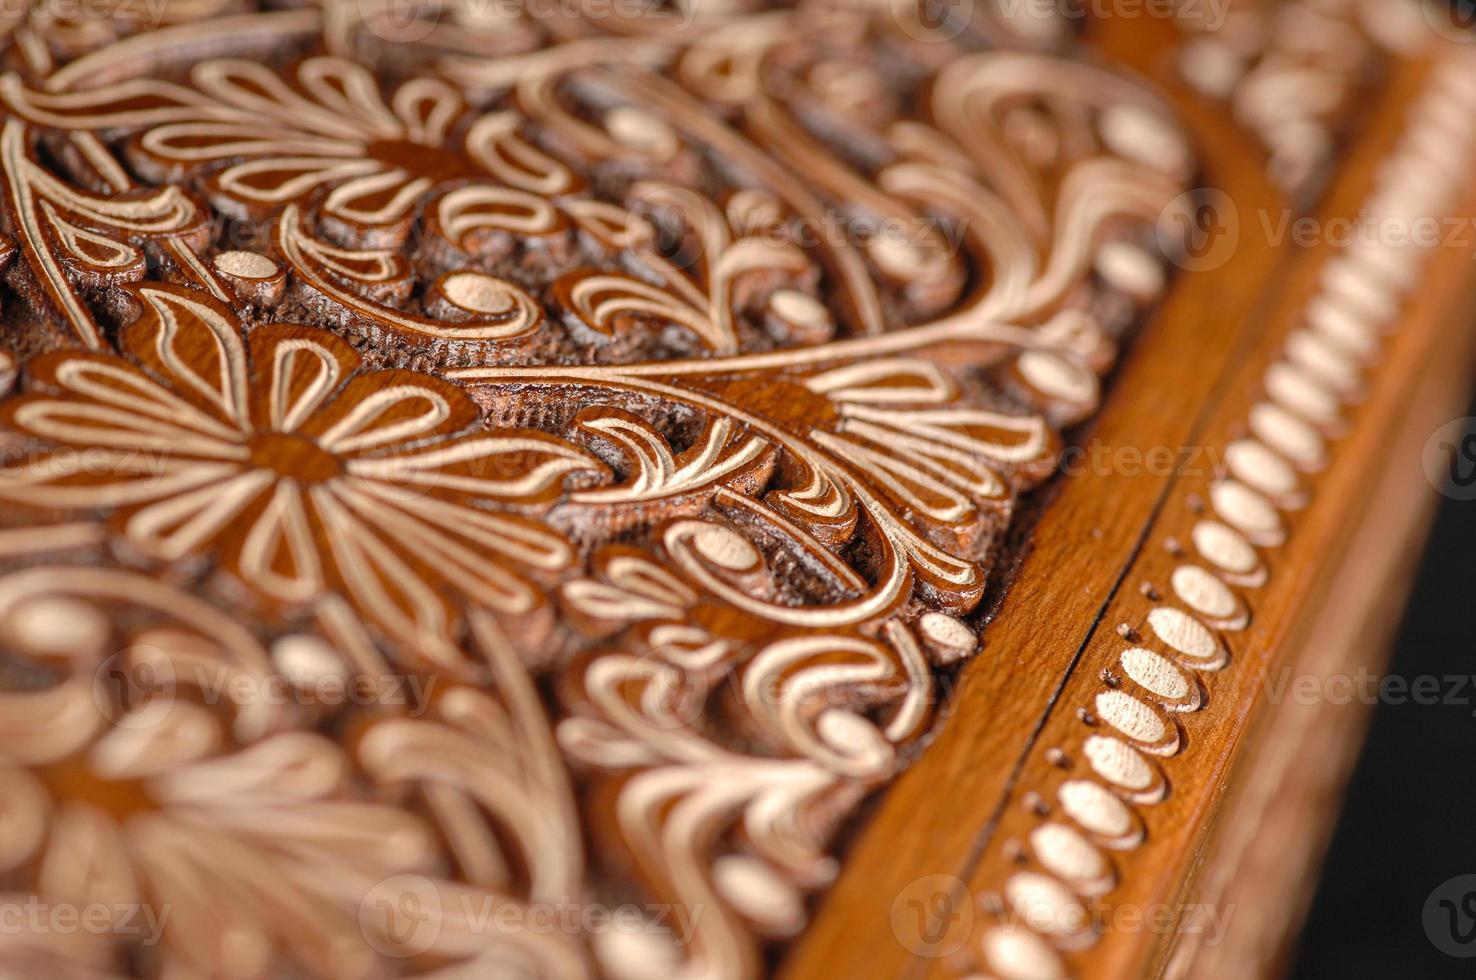 The close-up vintage oriental wooden table with the artistic carving, Uzbekistan photo